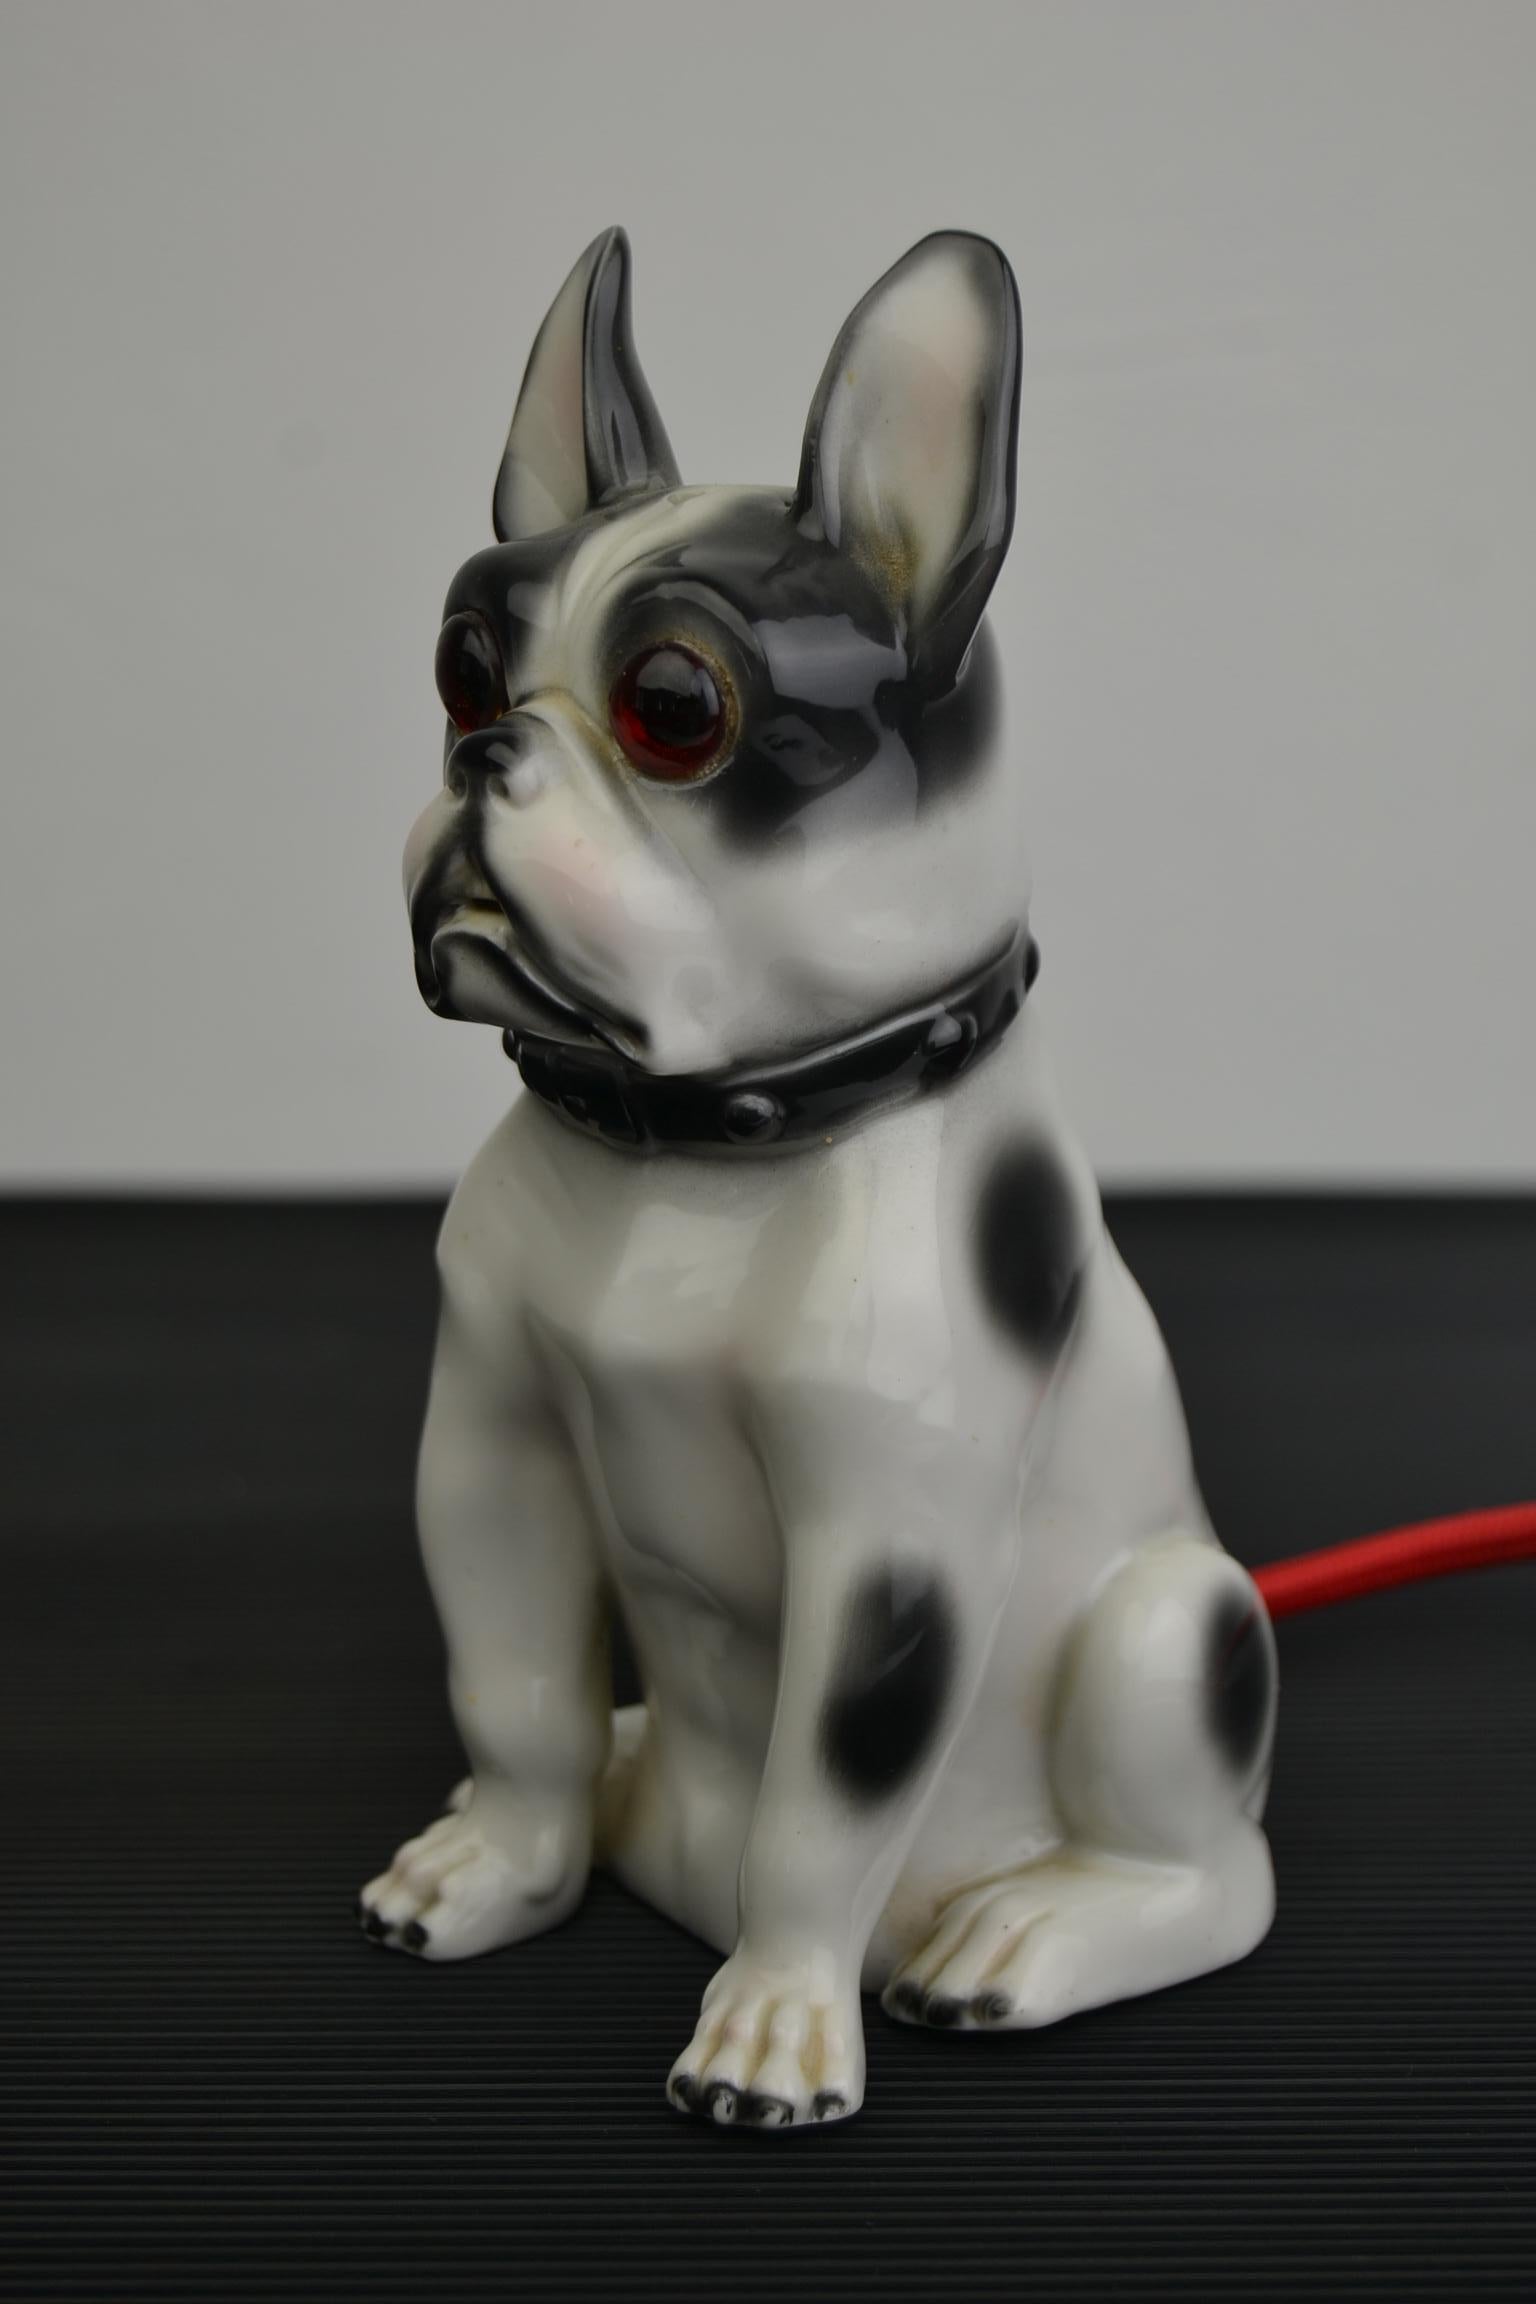 Art Deco porcelain perfume light in the shape of a French bulldog dog.
This dog figurine has big glass eyes and dates circa 1930s-1940s.
He wears a number on the base and comes probably from Germany.
When the light is on, he looks adorable.